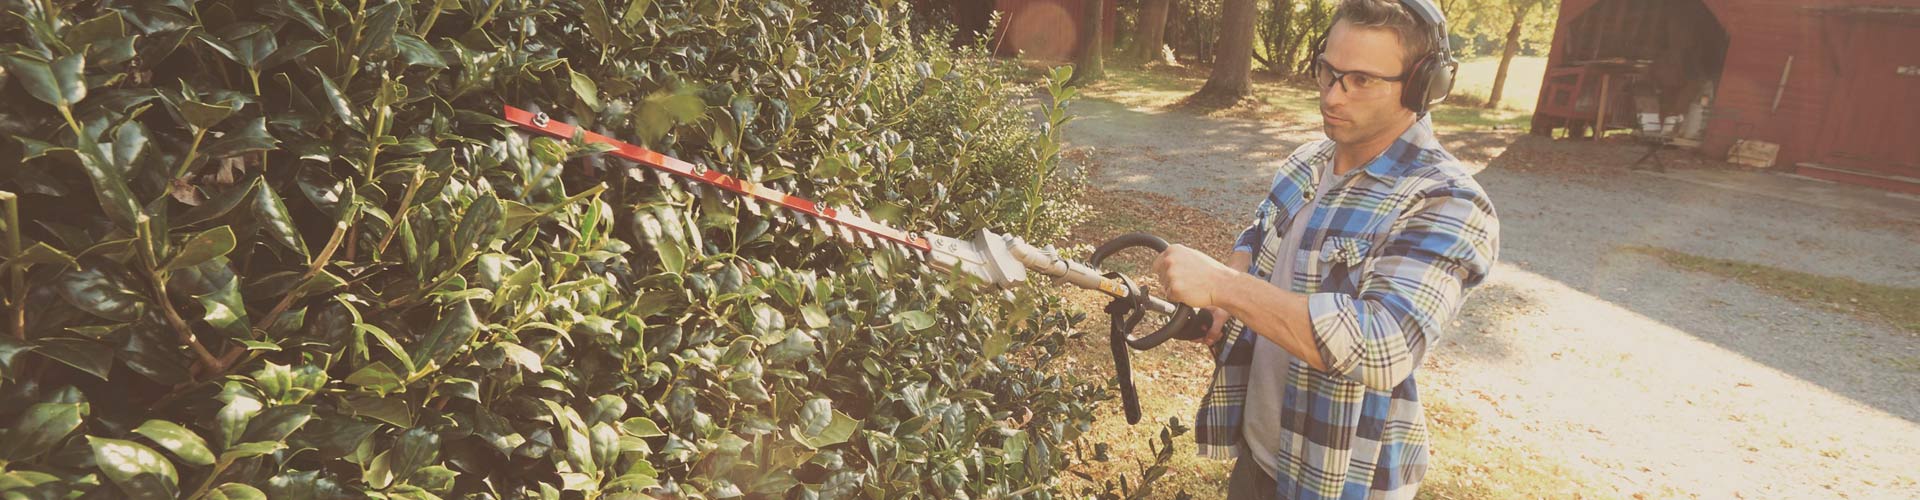 Jonsered Hedge Trimmers